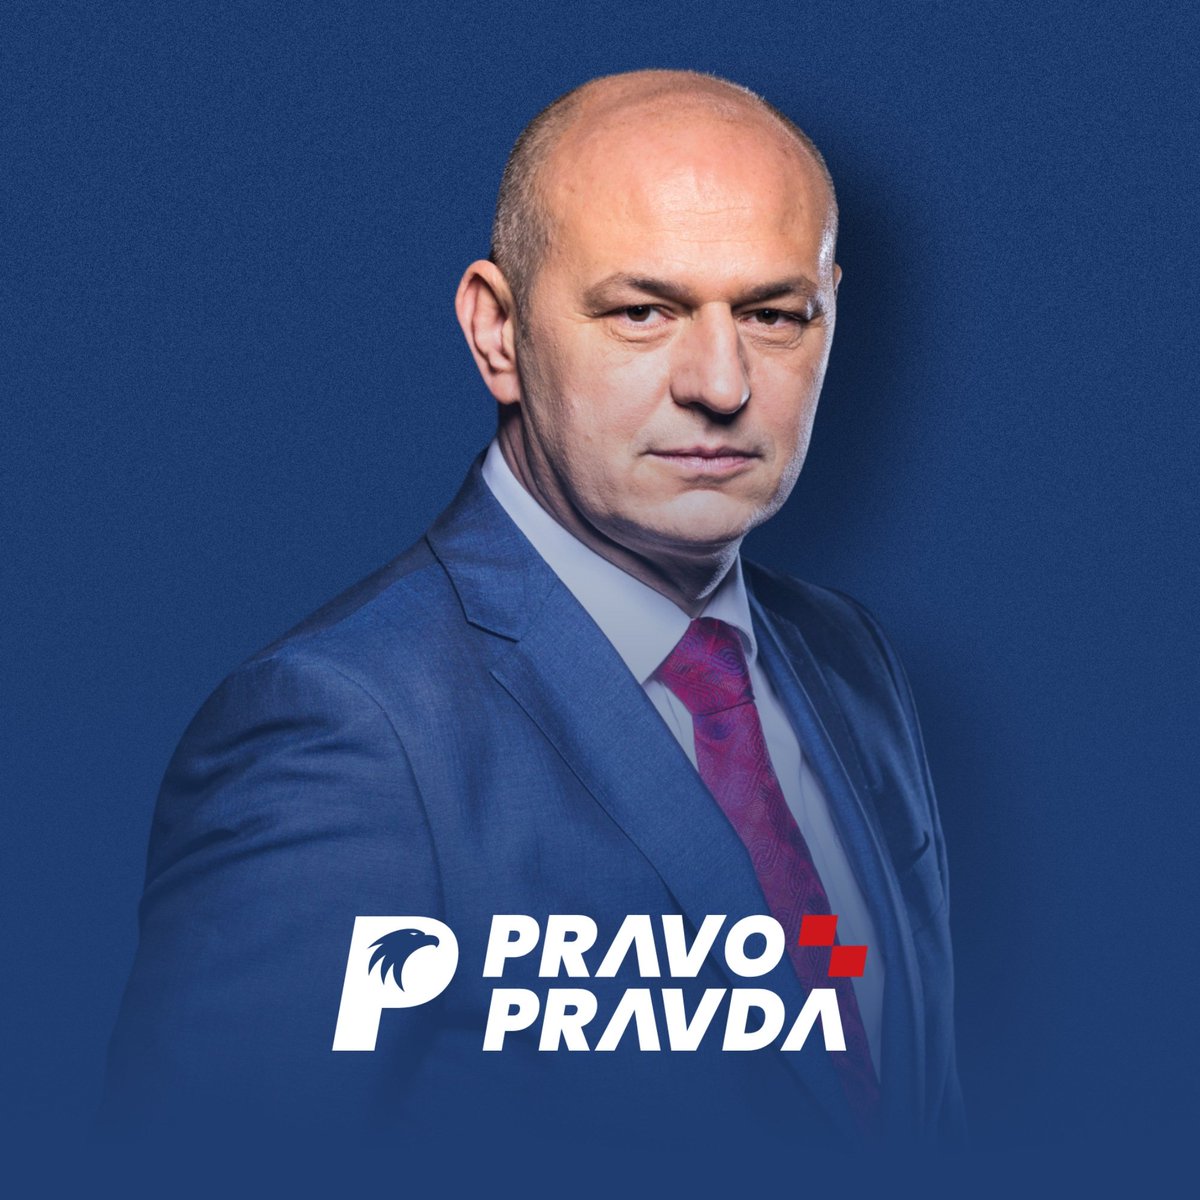 The incumbent MEP and Law and Justice (PiP-NI) leader Mislav Kolakušić was elected to Sabor on the 🦅DP/PiP joint list in the I district!

He will likely be the only PiP MP if he resigns from the EP (he can't be both an MEP & MP at the same time)
✔️